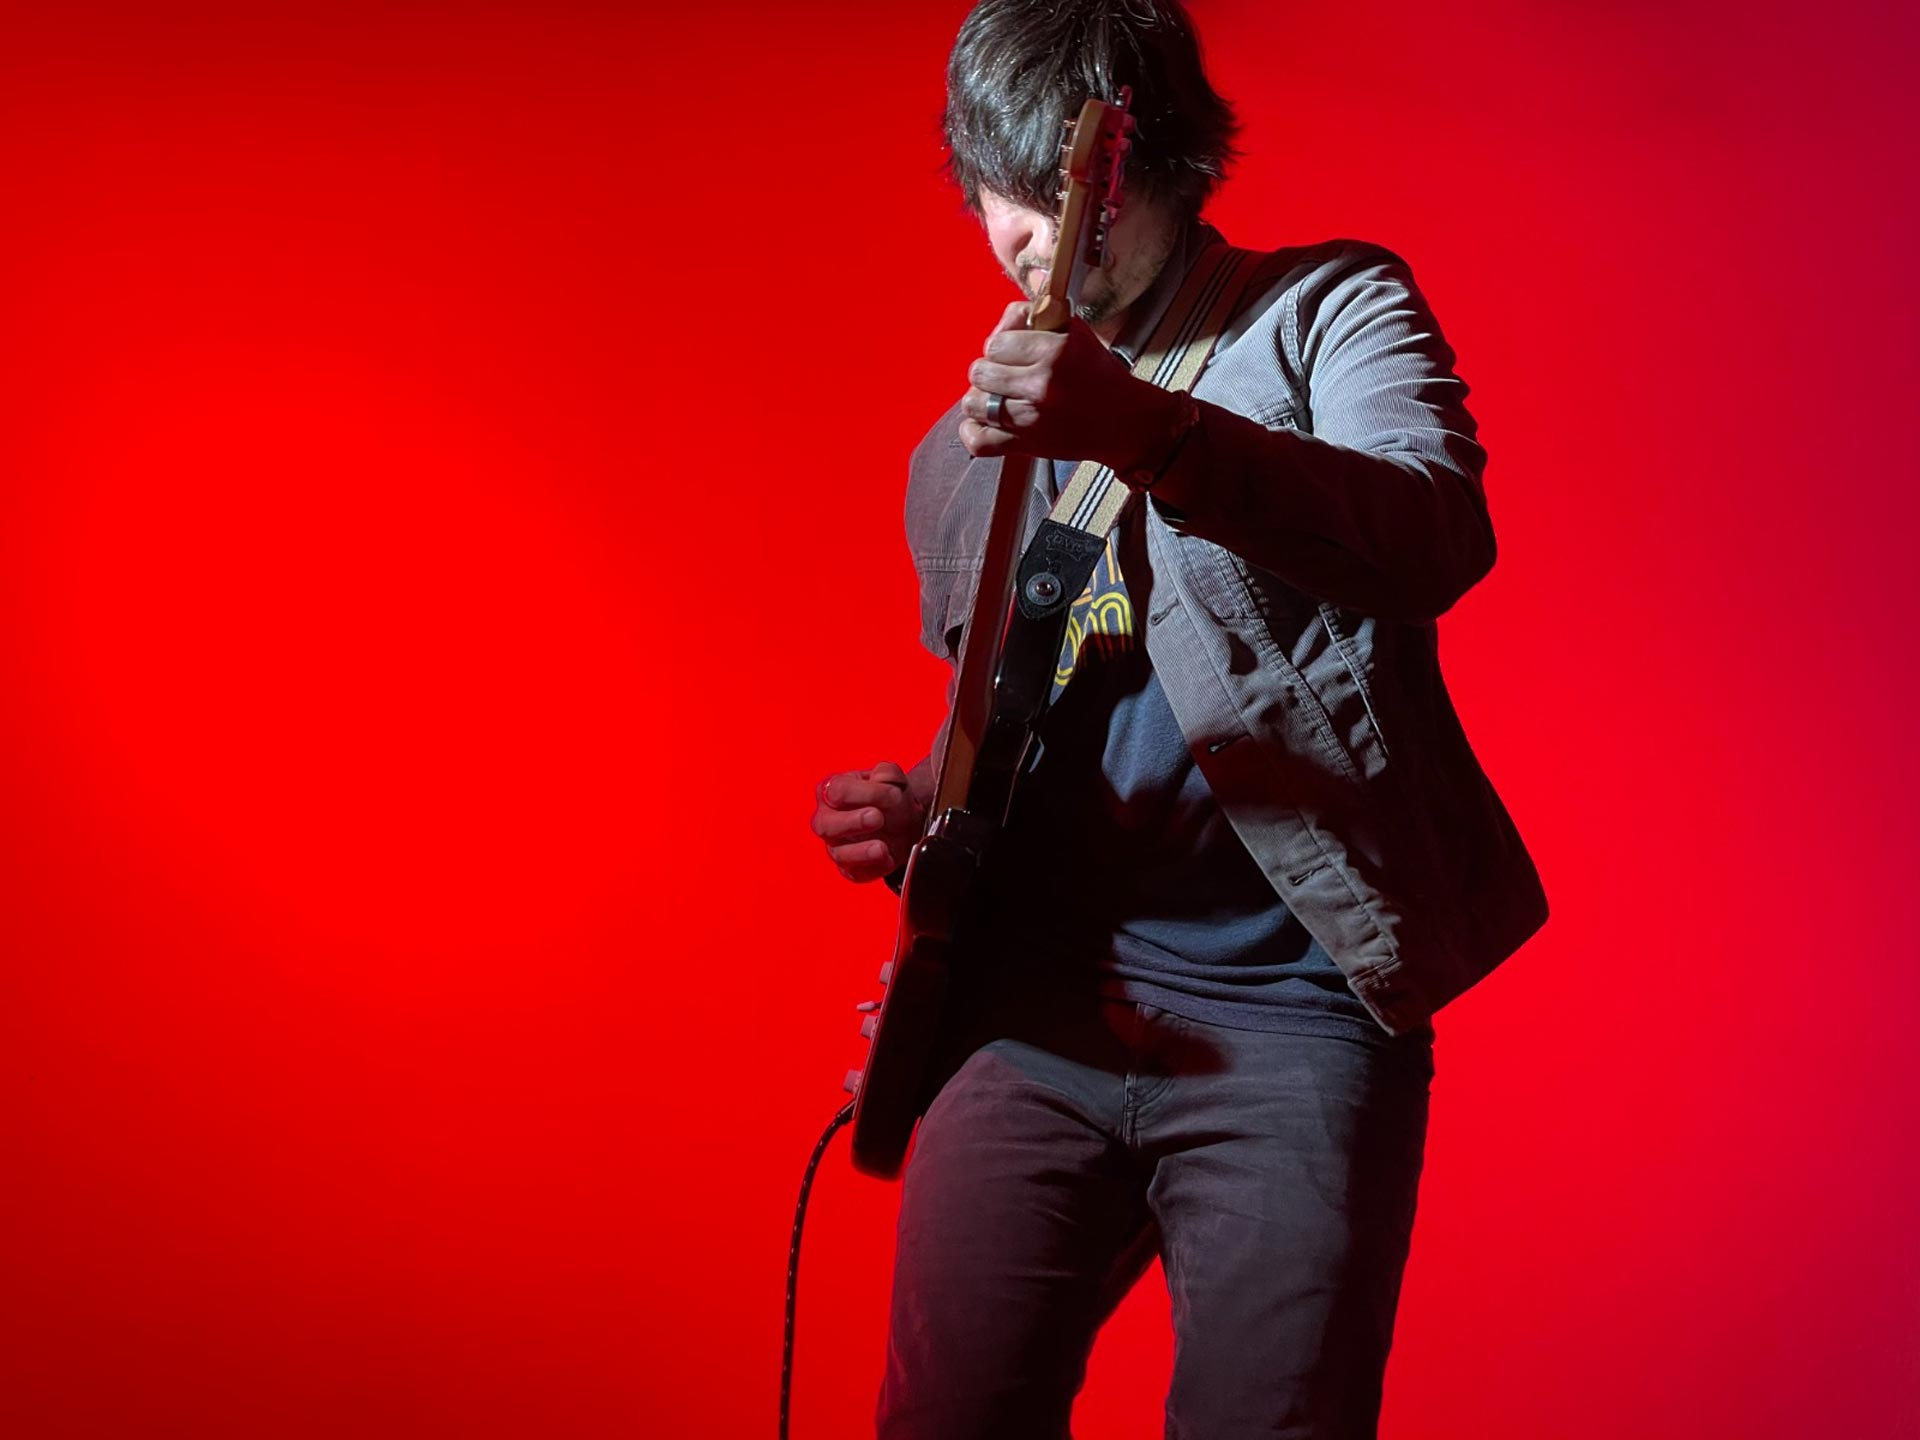 Jason Moore playing guitar on red background